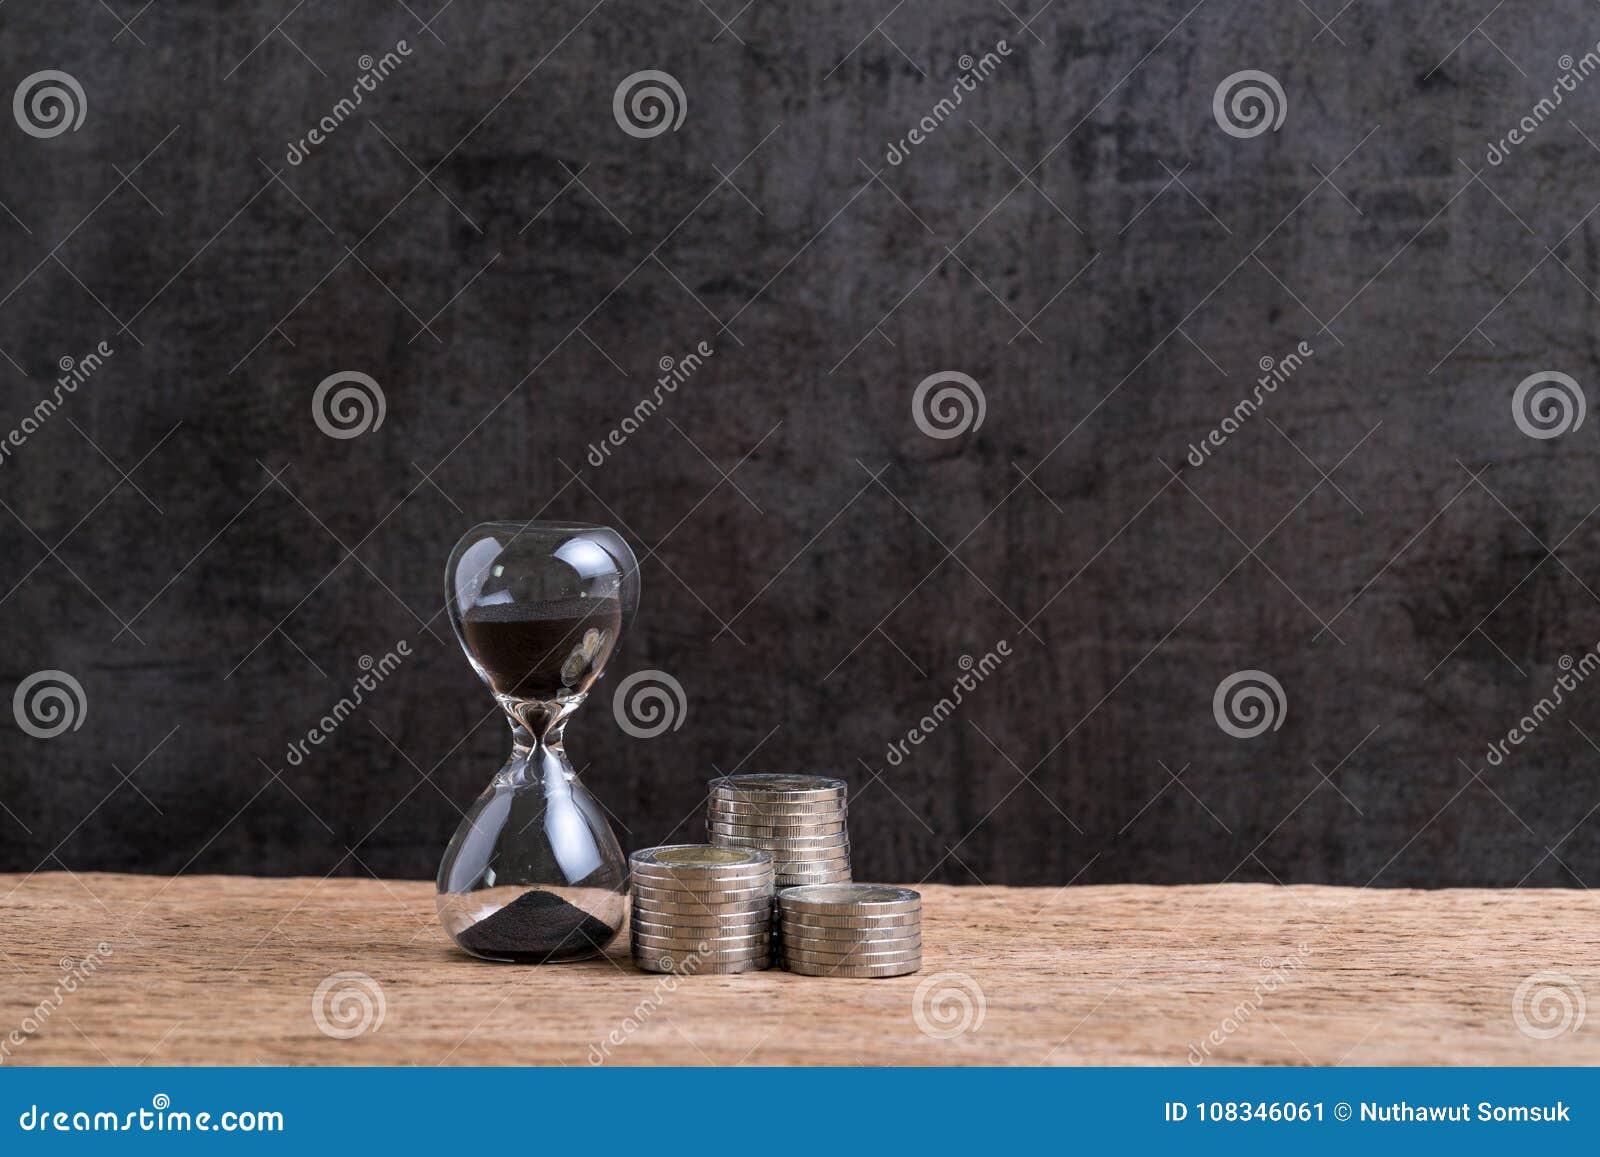 financial time or long term investment concept with hourglass or